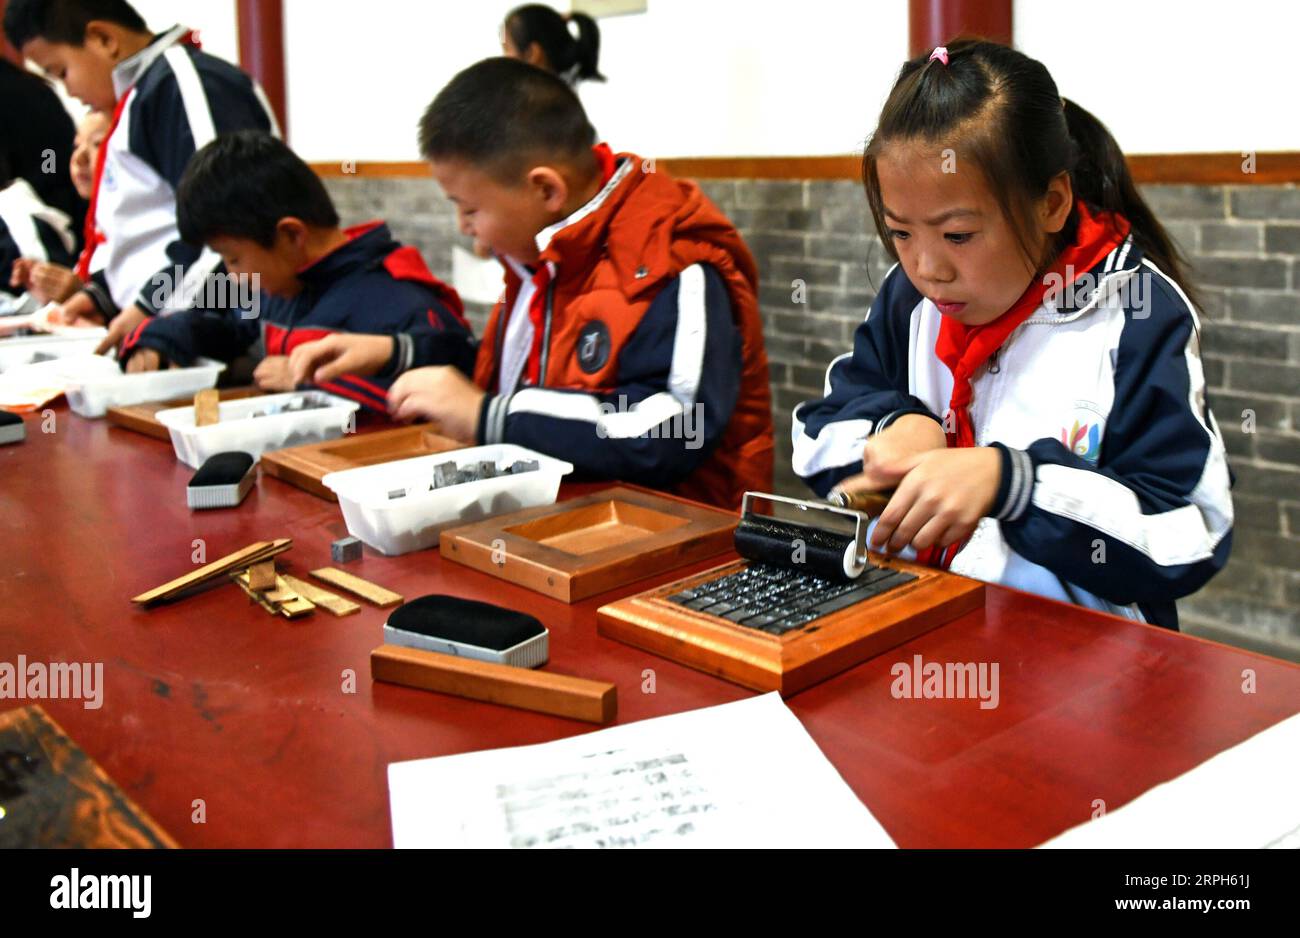 191031 -- JINAN, Oct. 31, 2019 -- Pupils of Xixian primary school experience movable-type printing at Lubei intangible cultural heritage experiencing center in Wudi County, east China s Shandong Province, Oct. 30, 2019. The experiencing center provides a variety of intangible cultural heritage experiencing programs, including the arts of rubbing, ceramics, tie dyeing, paper-making and movable-type printing, aiming to promote traditional Chinese culture through immersive experience.  CHINA-SHANDONG-JINAN-INTANGIBLE CULTURAL HERITAGE-CENTER CN ZhuxZheng PUBLICATIONxNOTxINxCHN Stock Photo